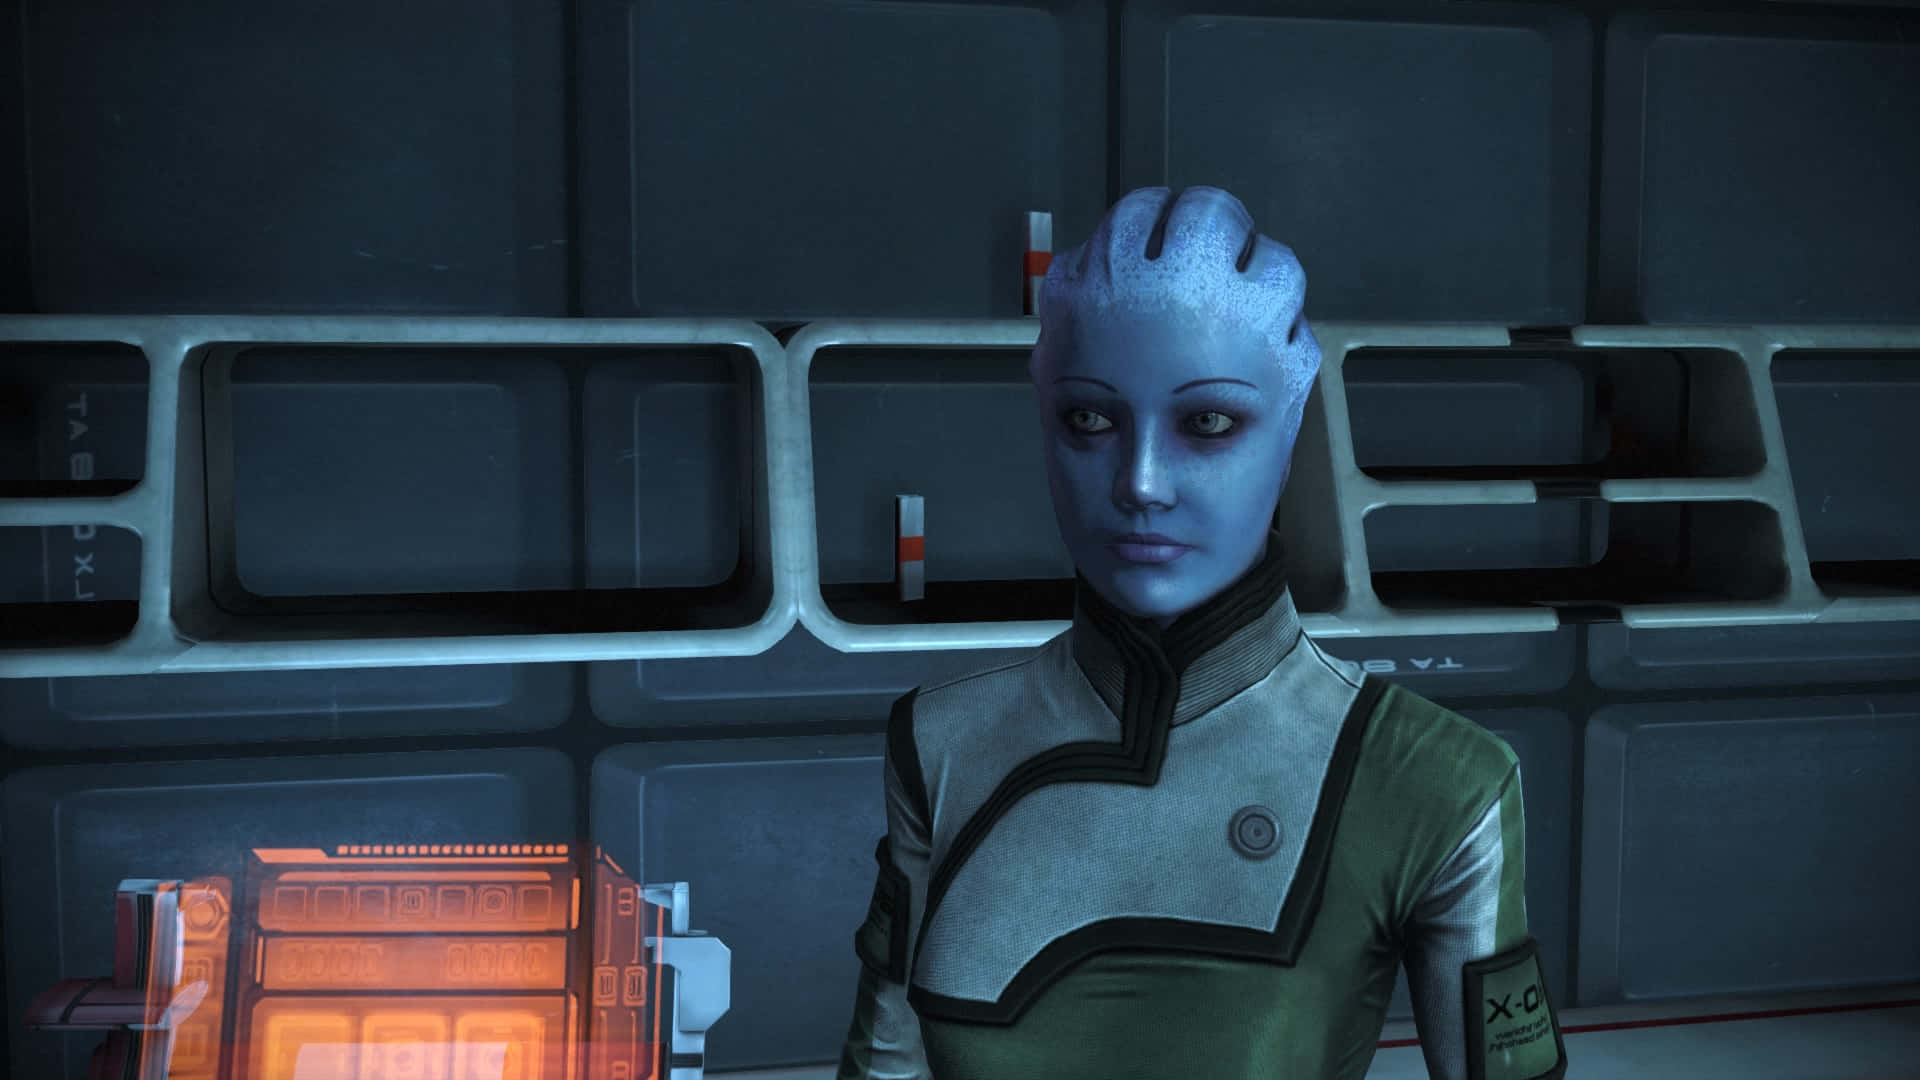 Liara T'Soni in the midst of a biotic battle. Wallpaper